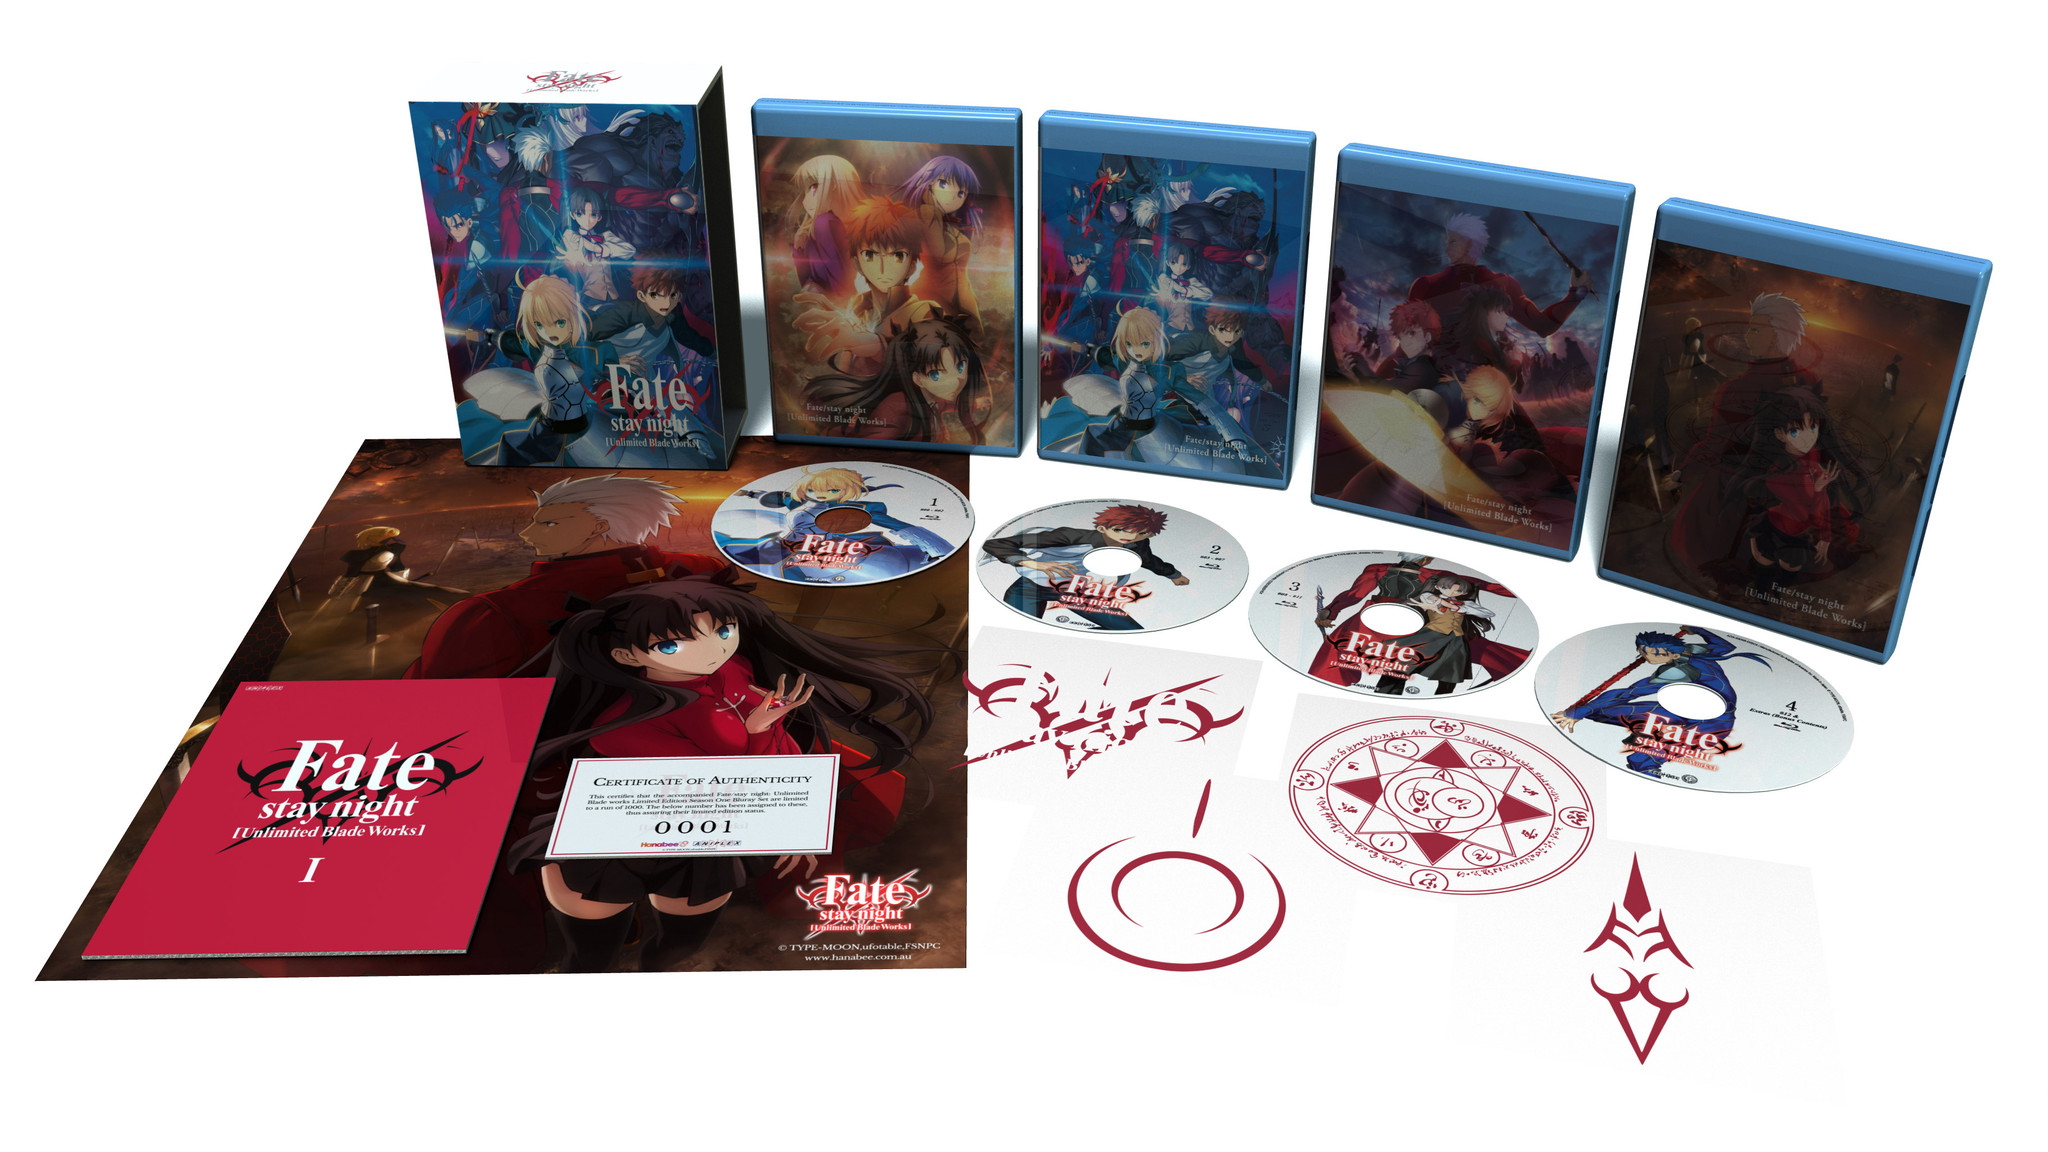 Hanabee Reveals 'Fate/stay night: [Unlimited Blade Works]' Limited